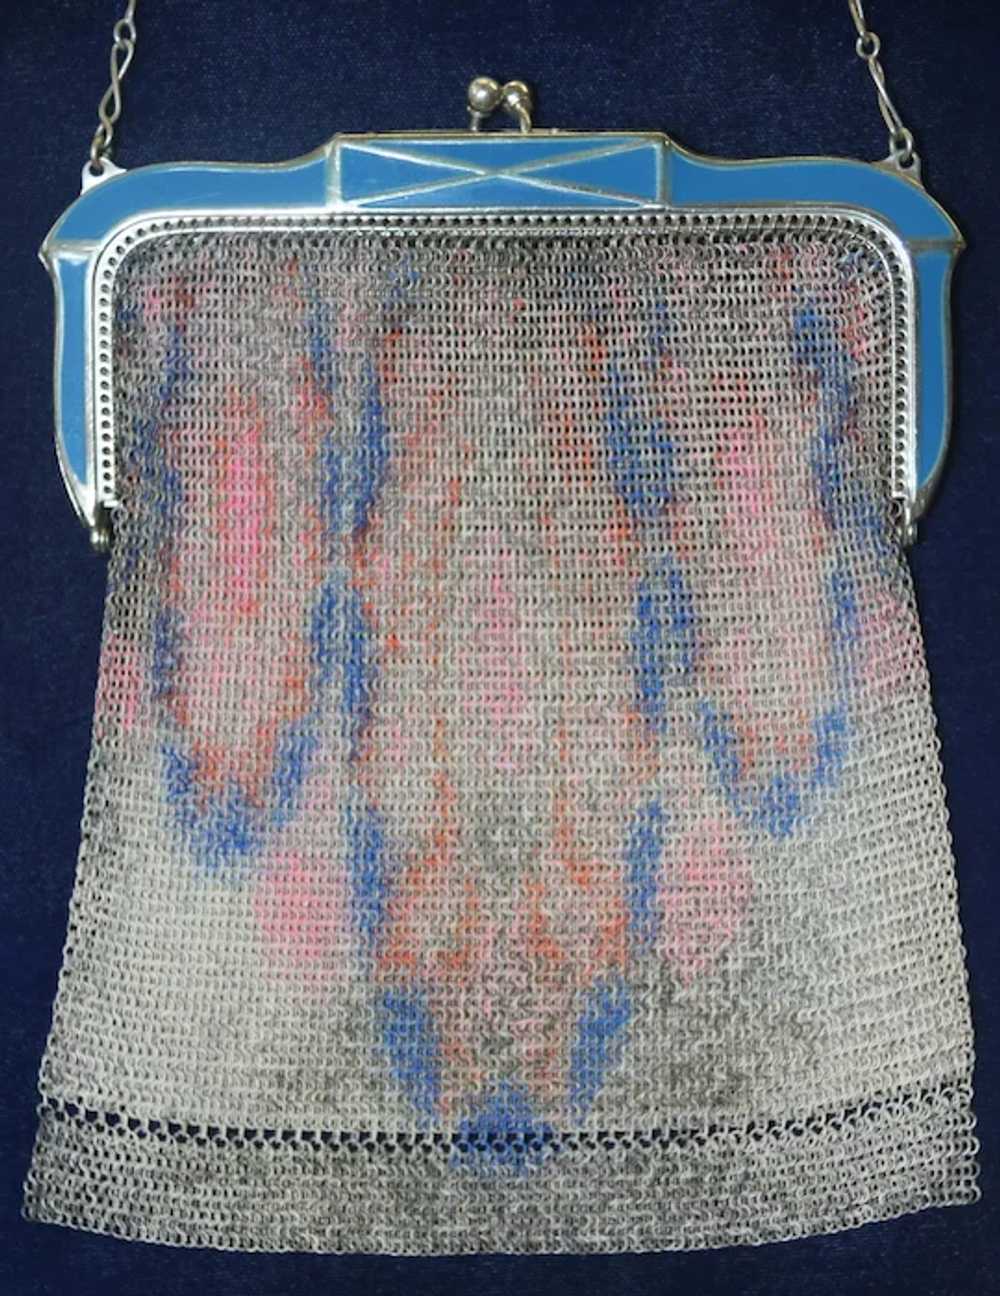 Vintage 1920s Whiting and Davis Dresden Mesh Purse - image 8